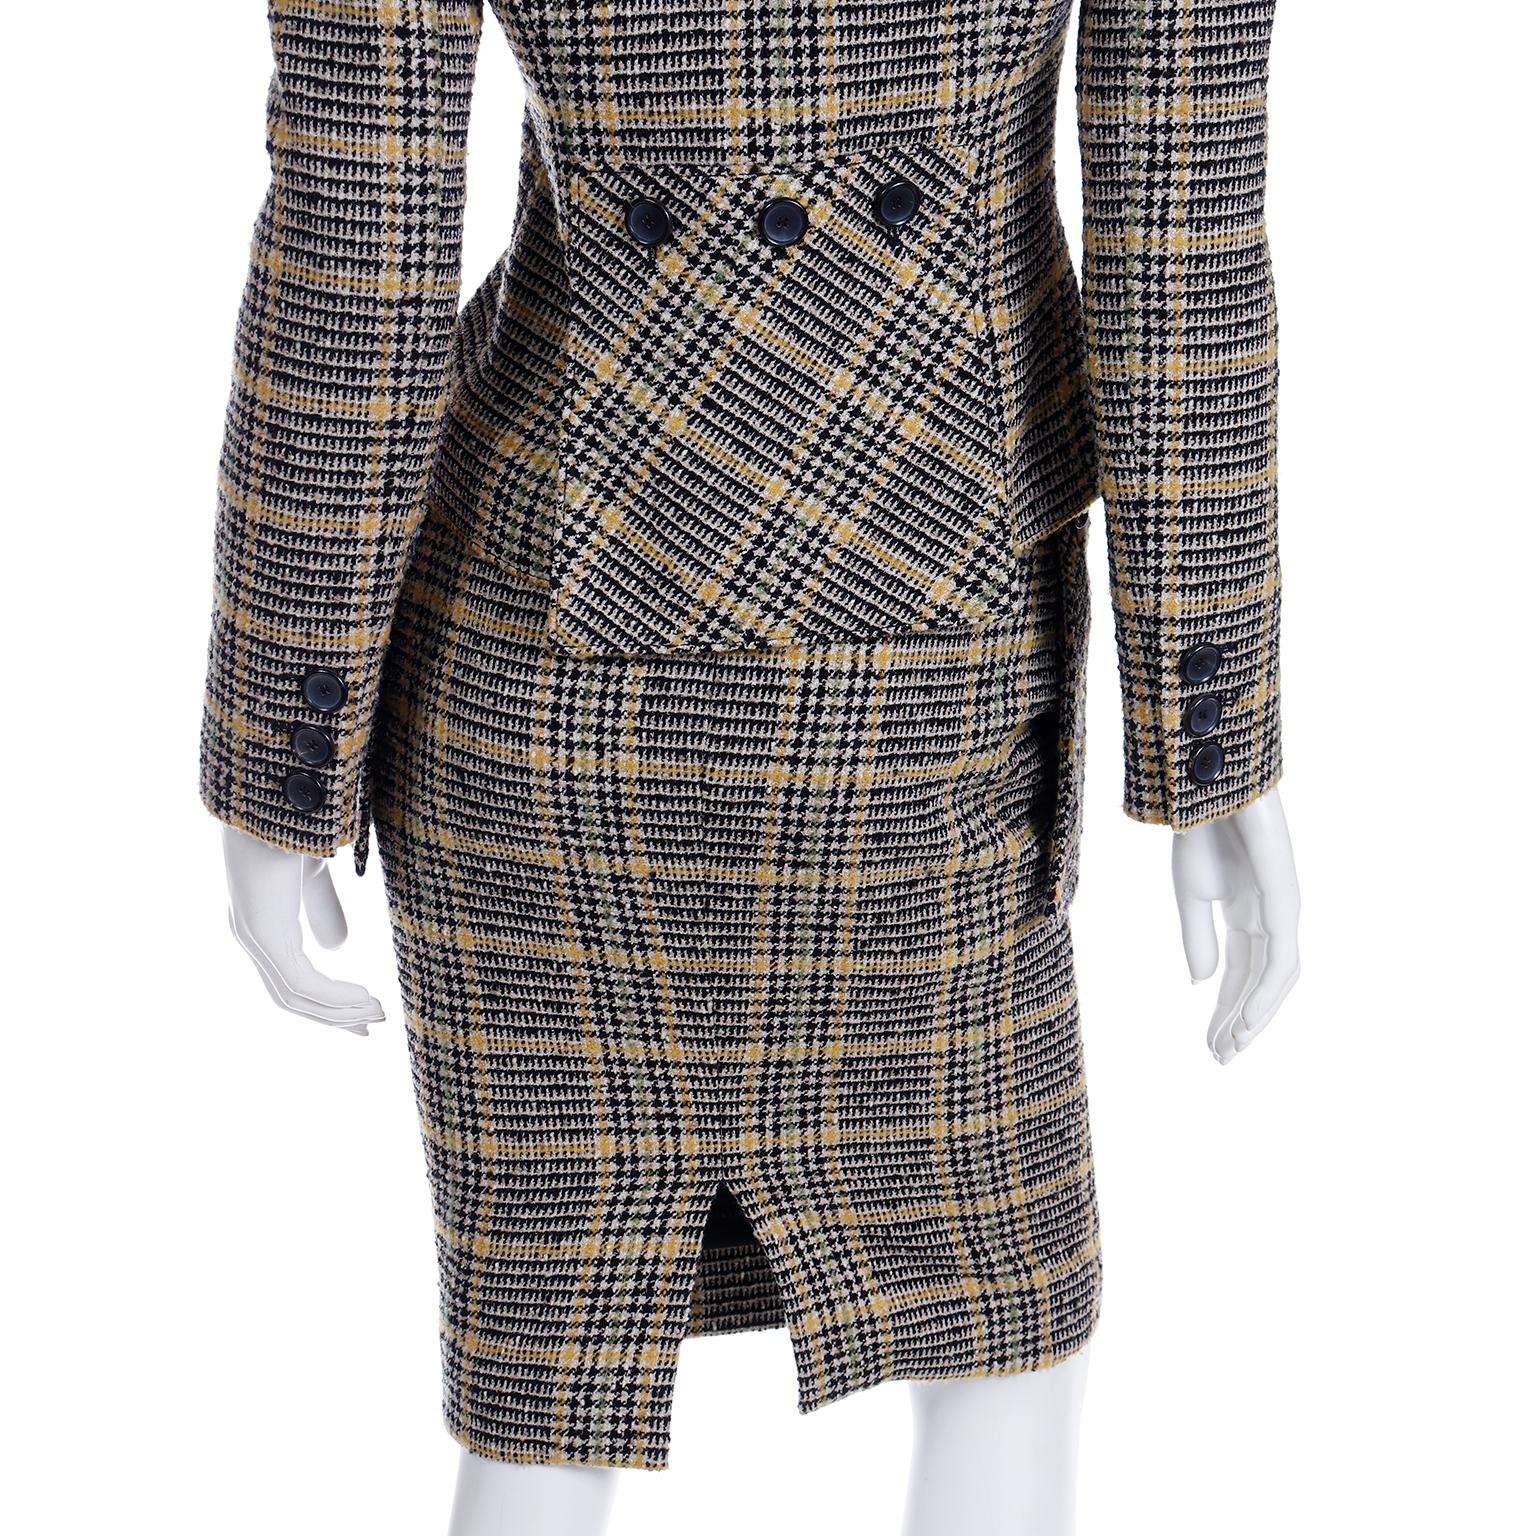 Valentino 2004 Runway Navy Blue Plaid Wool Skirt & Jacket Suit With Fox Fur For Sale 6